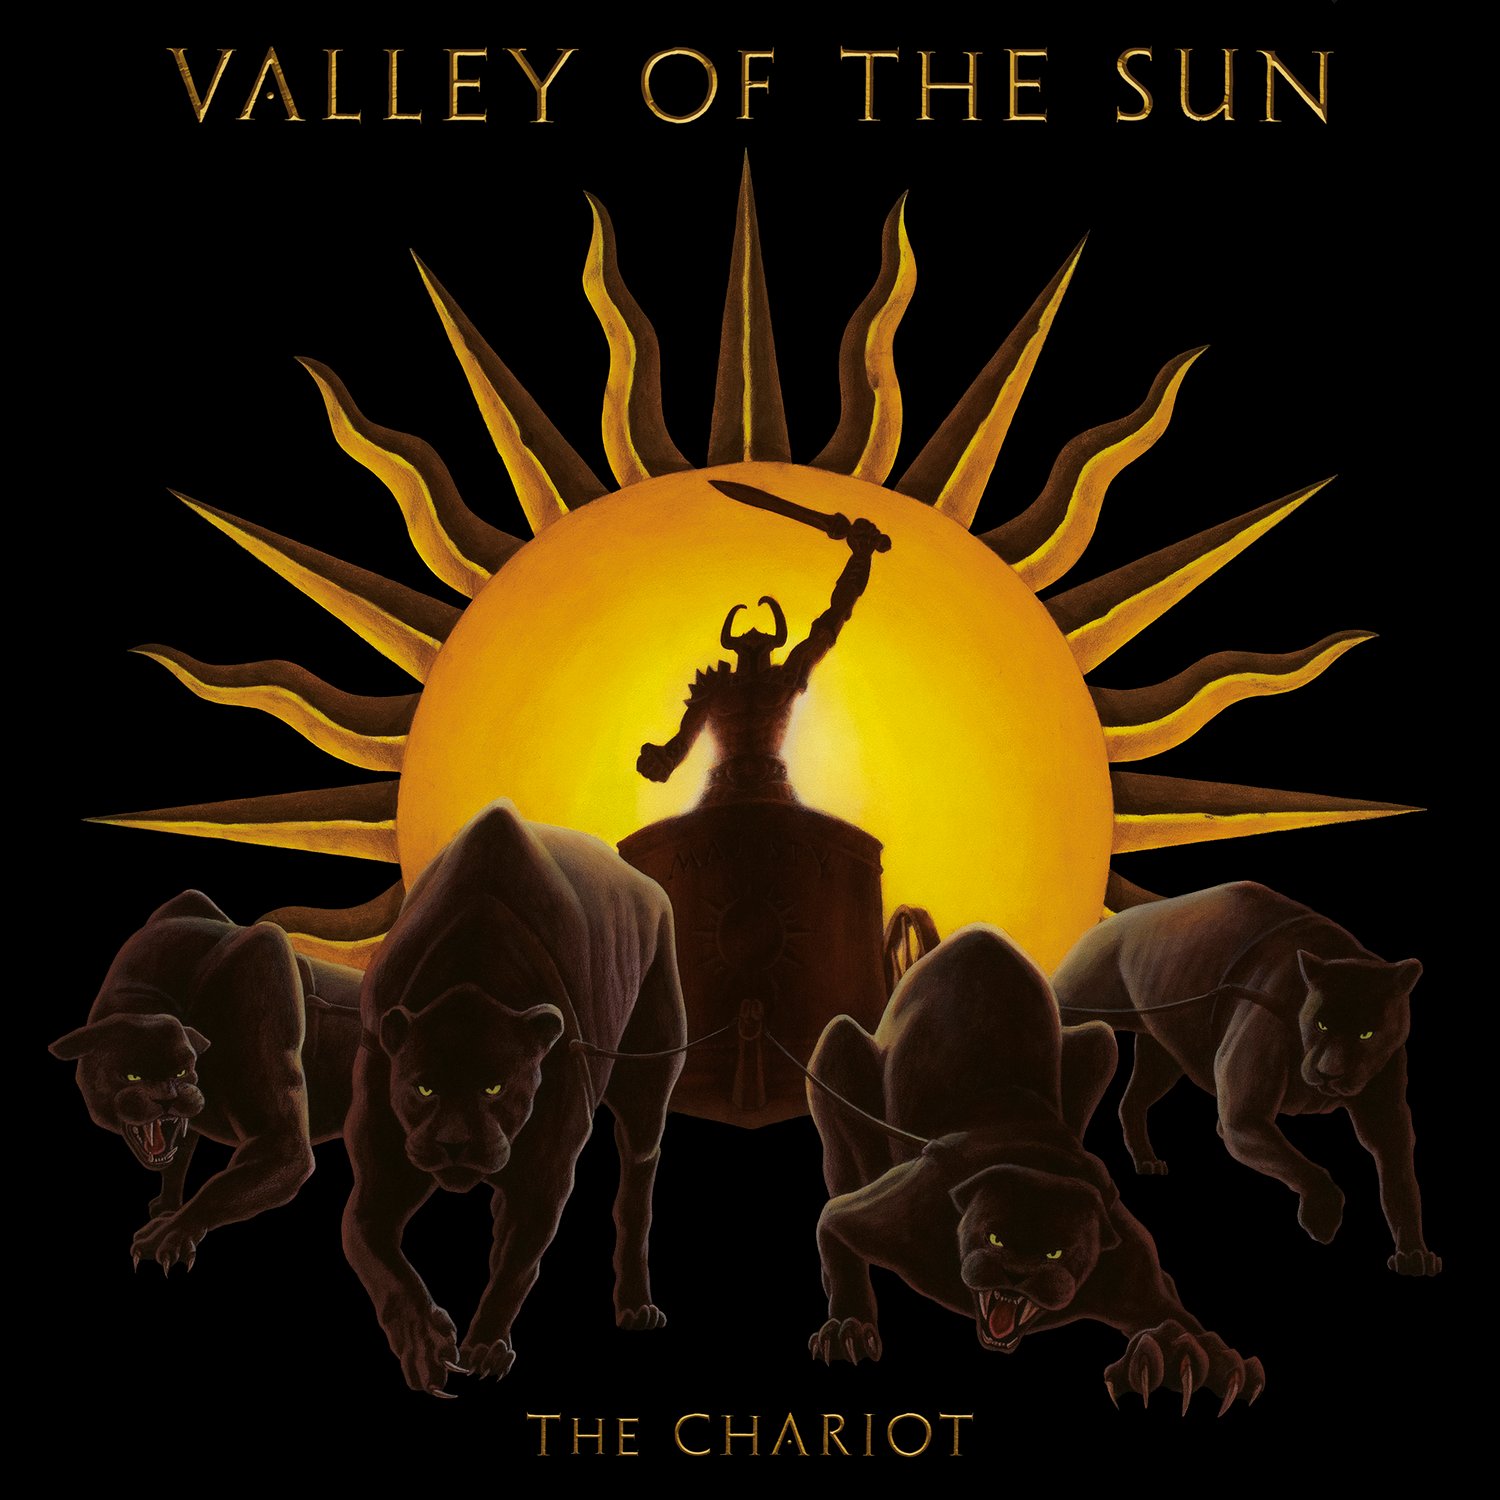 Image of Valley of the Sun - The Chariot Limited Digipak CD